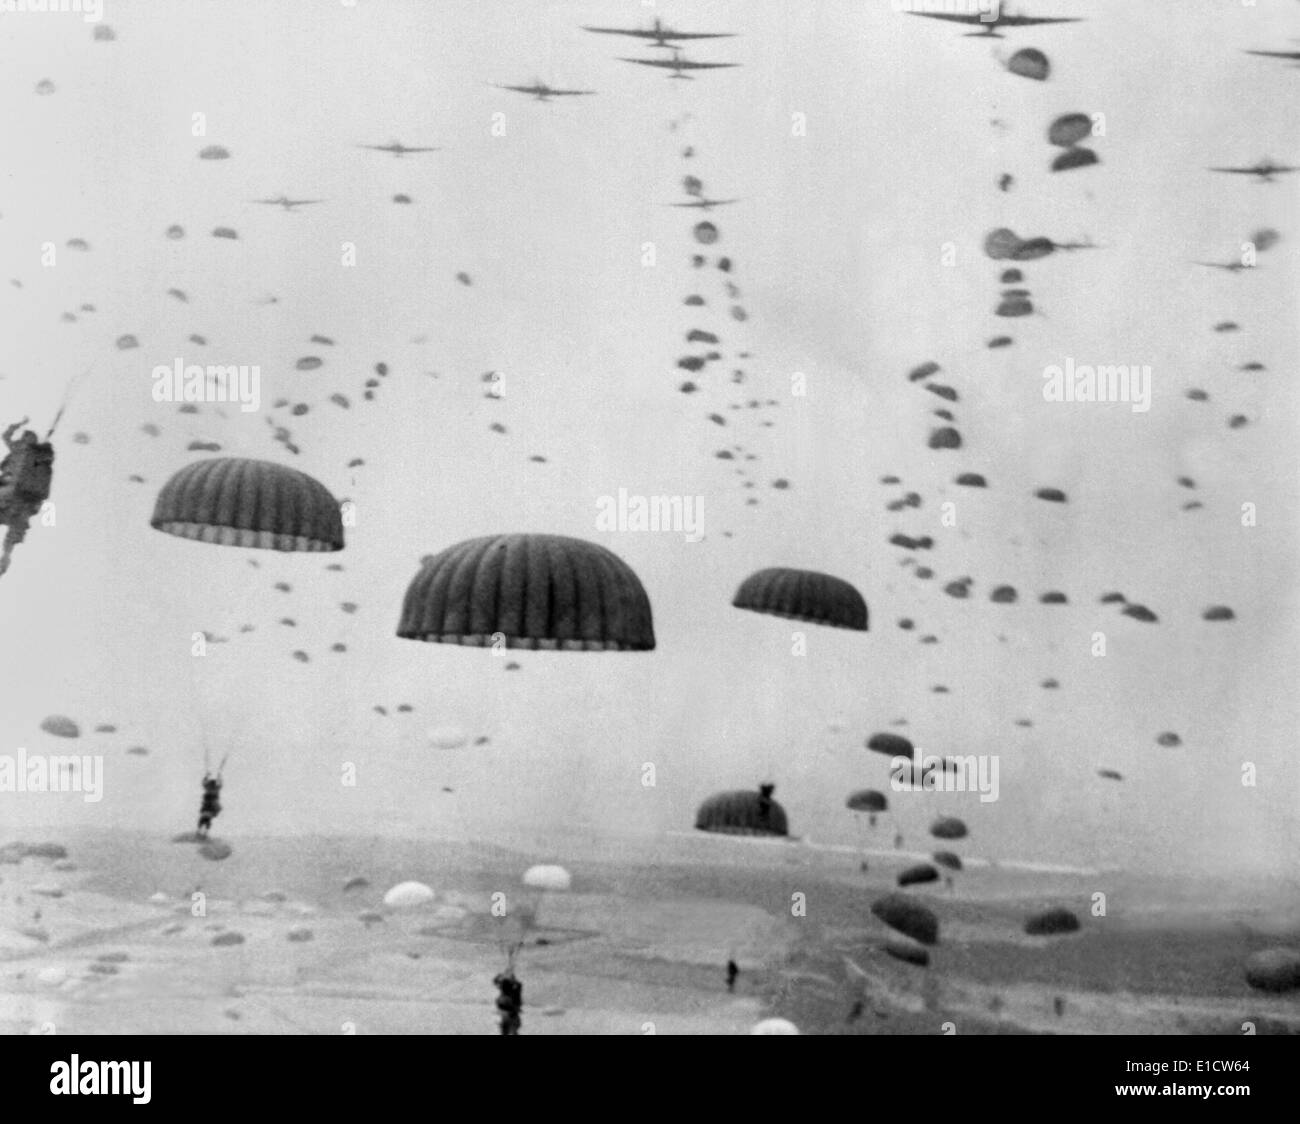 Allied aircraft drop paratroopers into German held Netherlands, for Operation Market Garden. The plan to capture key bridges in Stock Photo